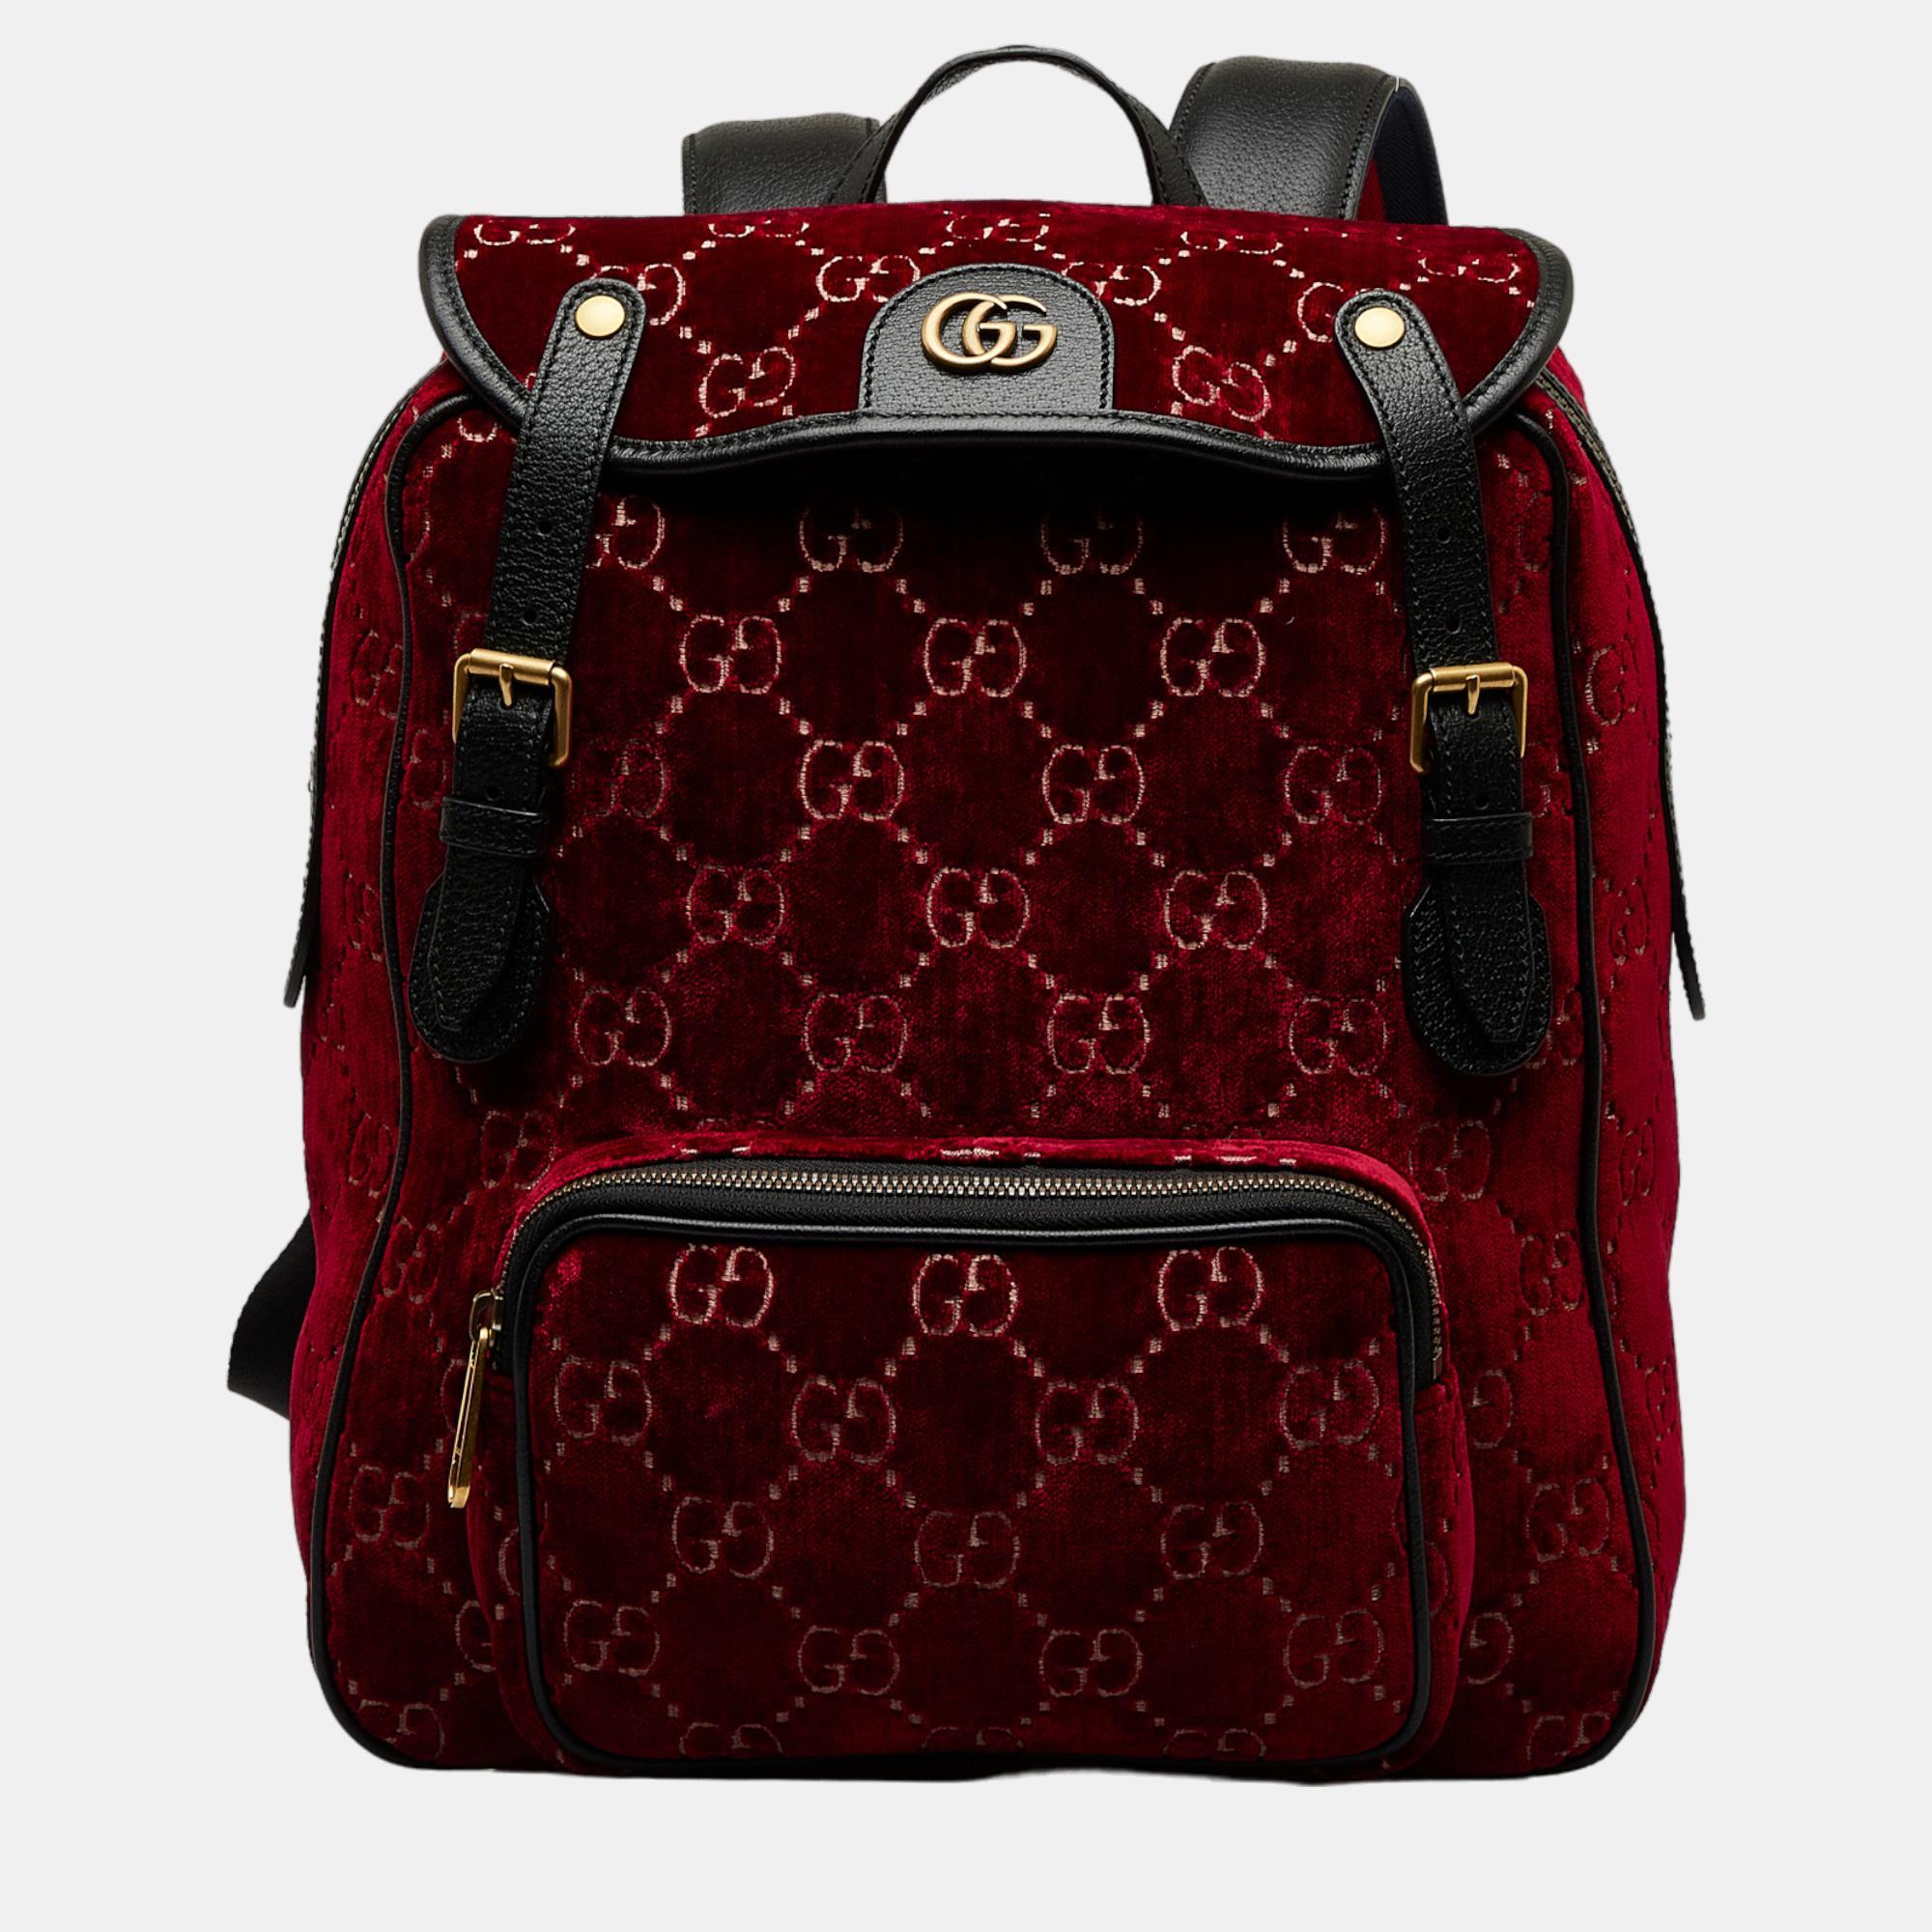 Gucci red gg velvet double buckle backpack